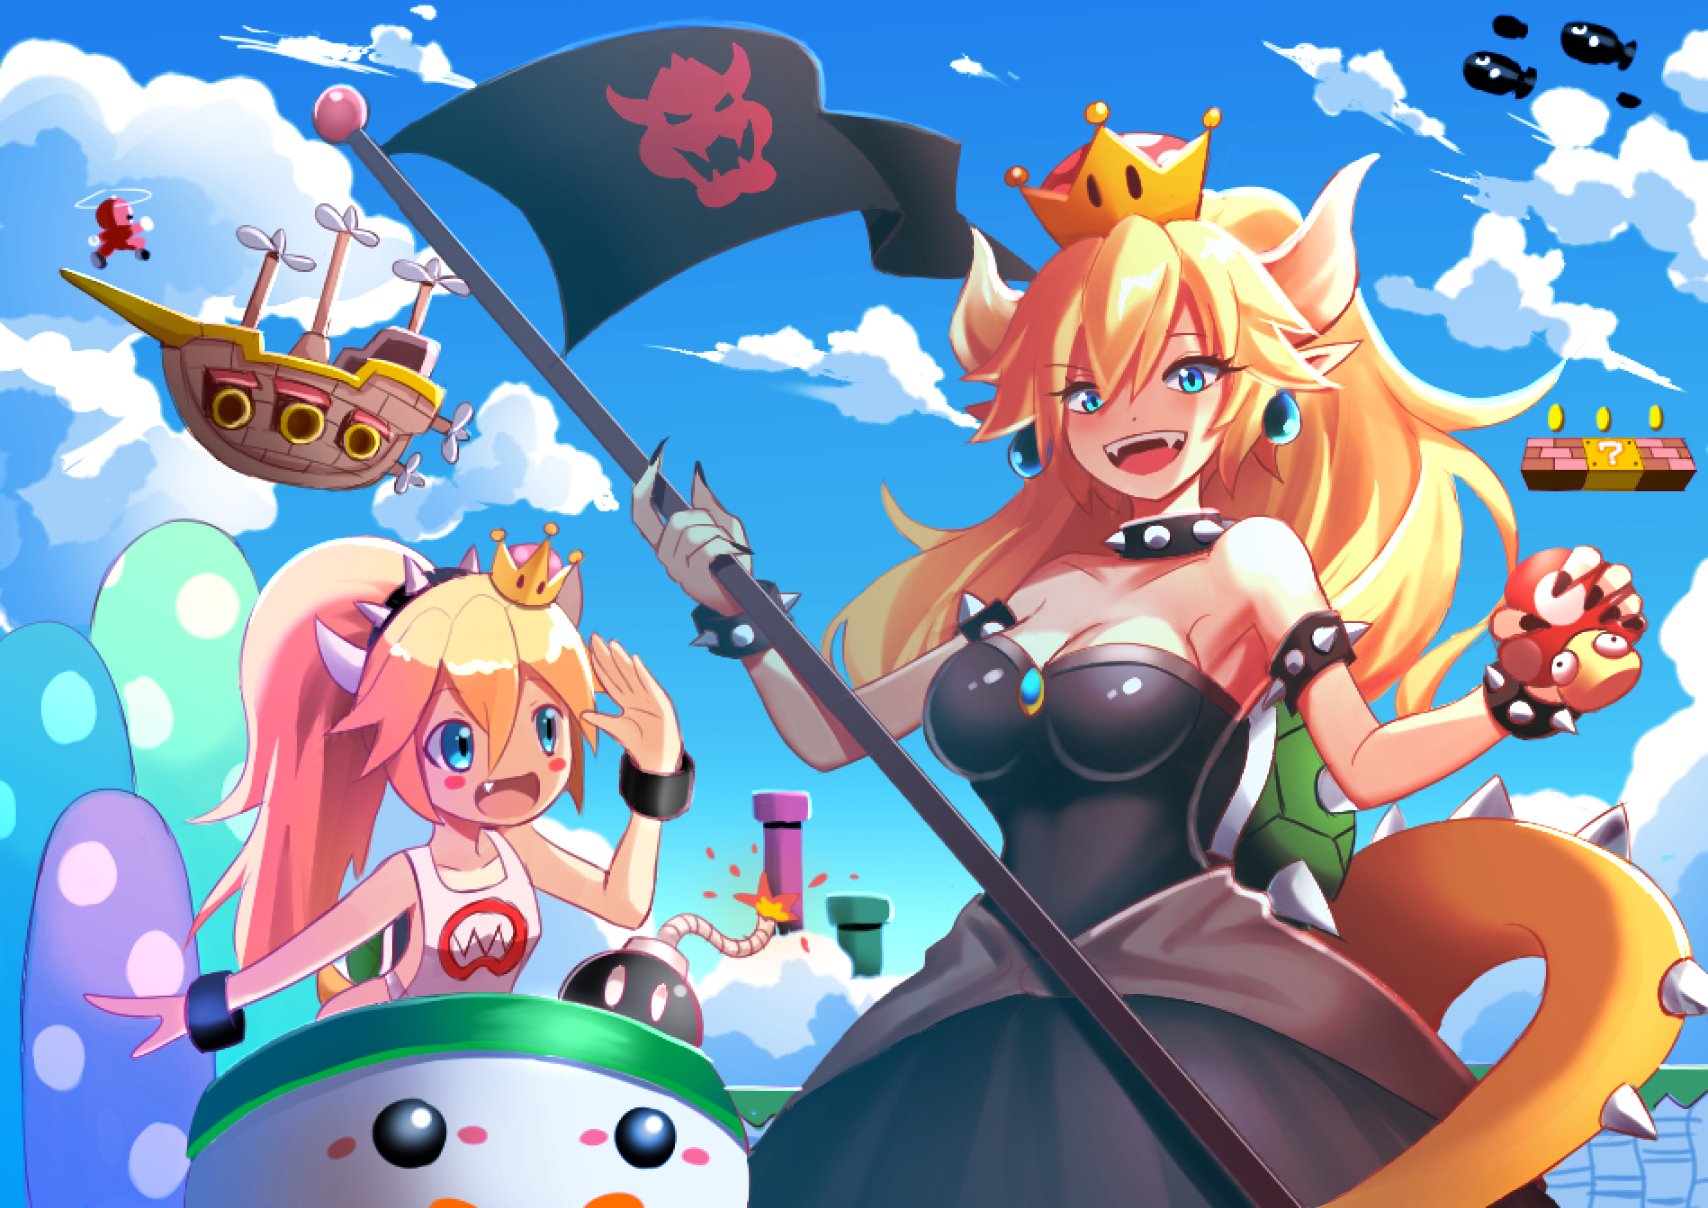 Who is Bowsette - Bowser and Princess Peach Are the Latest